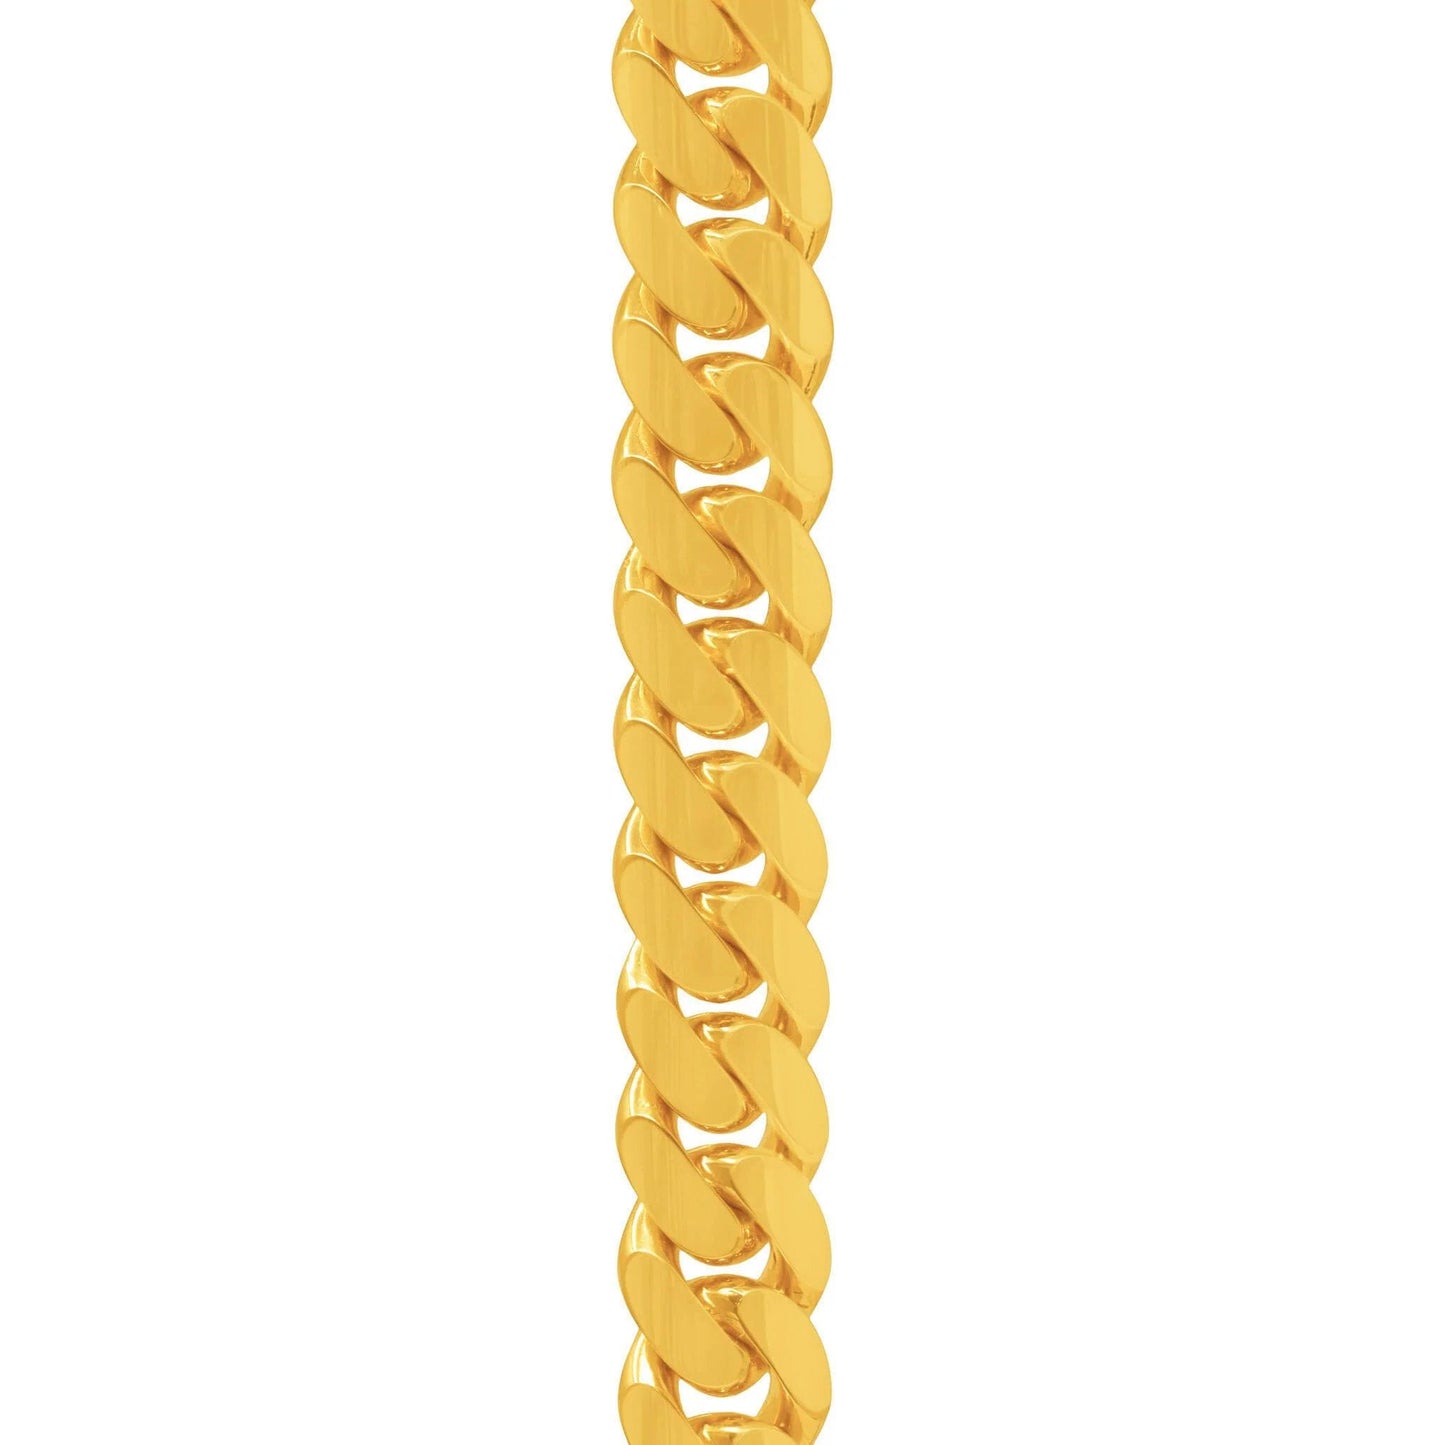 15mm Miami Cuban Link Bracelet in 14K Solid Yellow Gold - Vera Jewelry in Miami